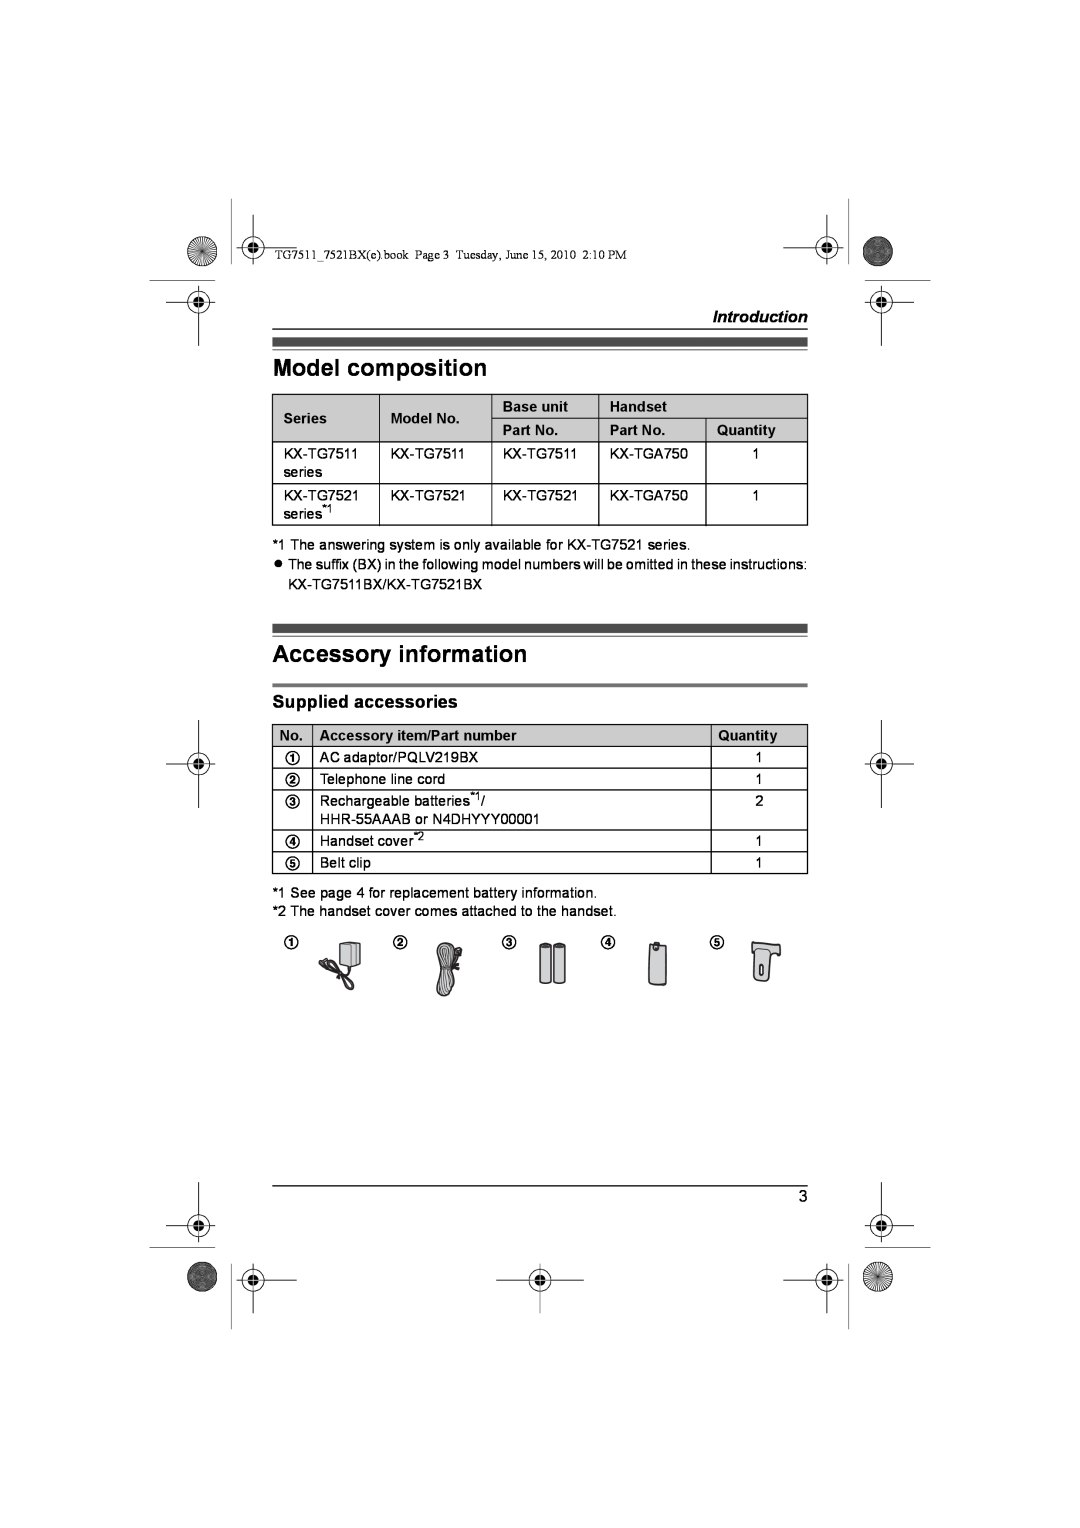 Panasonic KX-TG7511 Model composition, Accessory information, Supplied accessories, Introduction, Series, Model No 